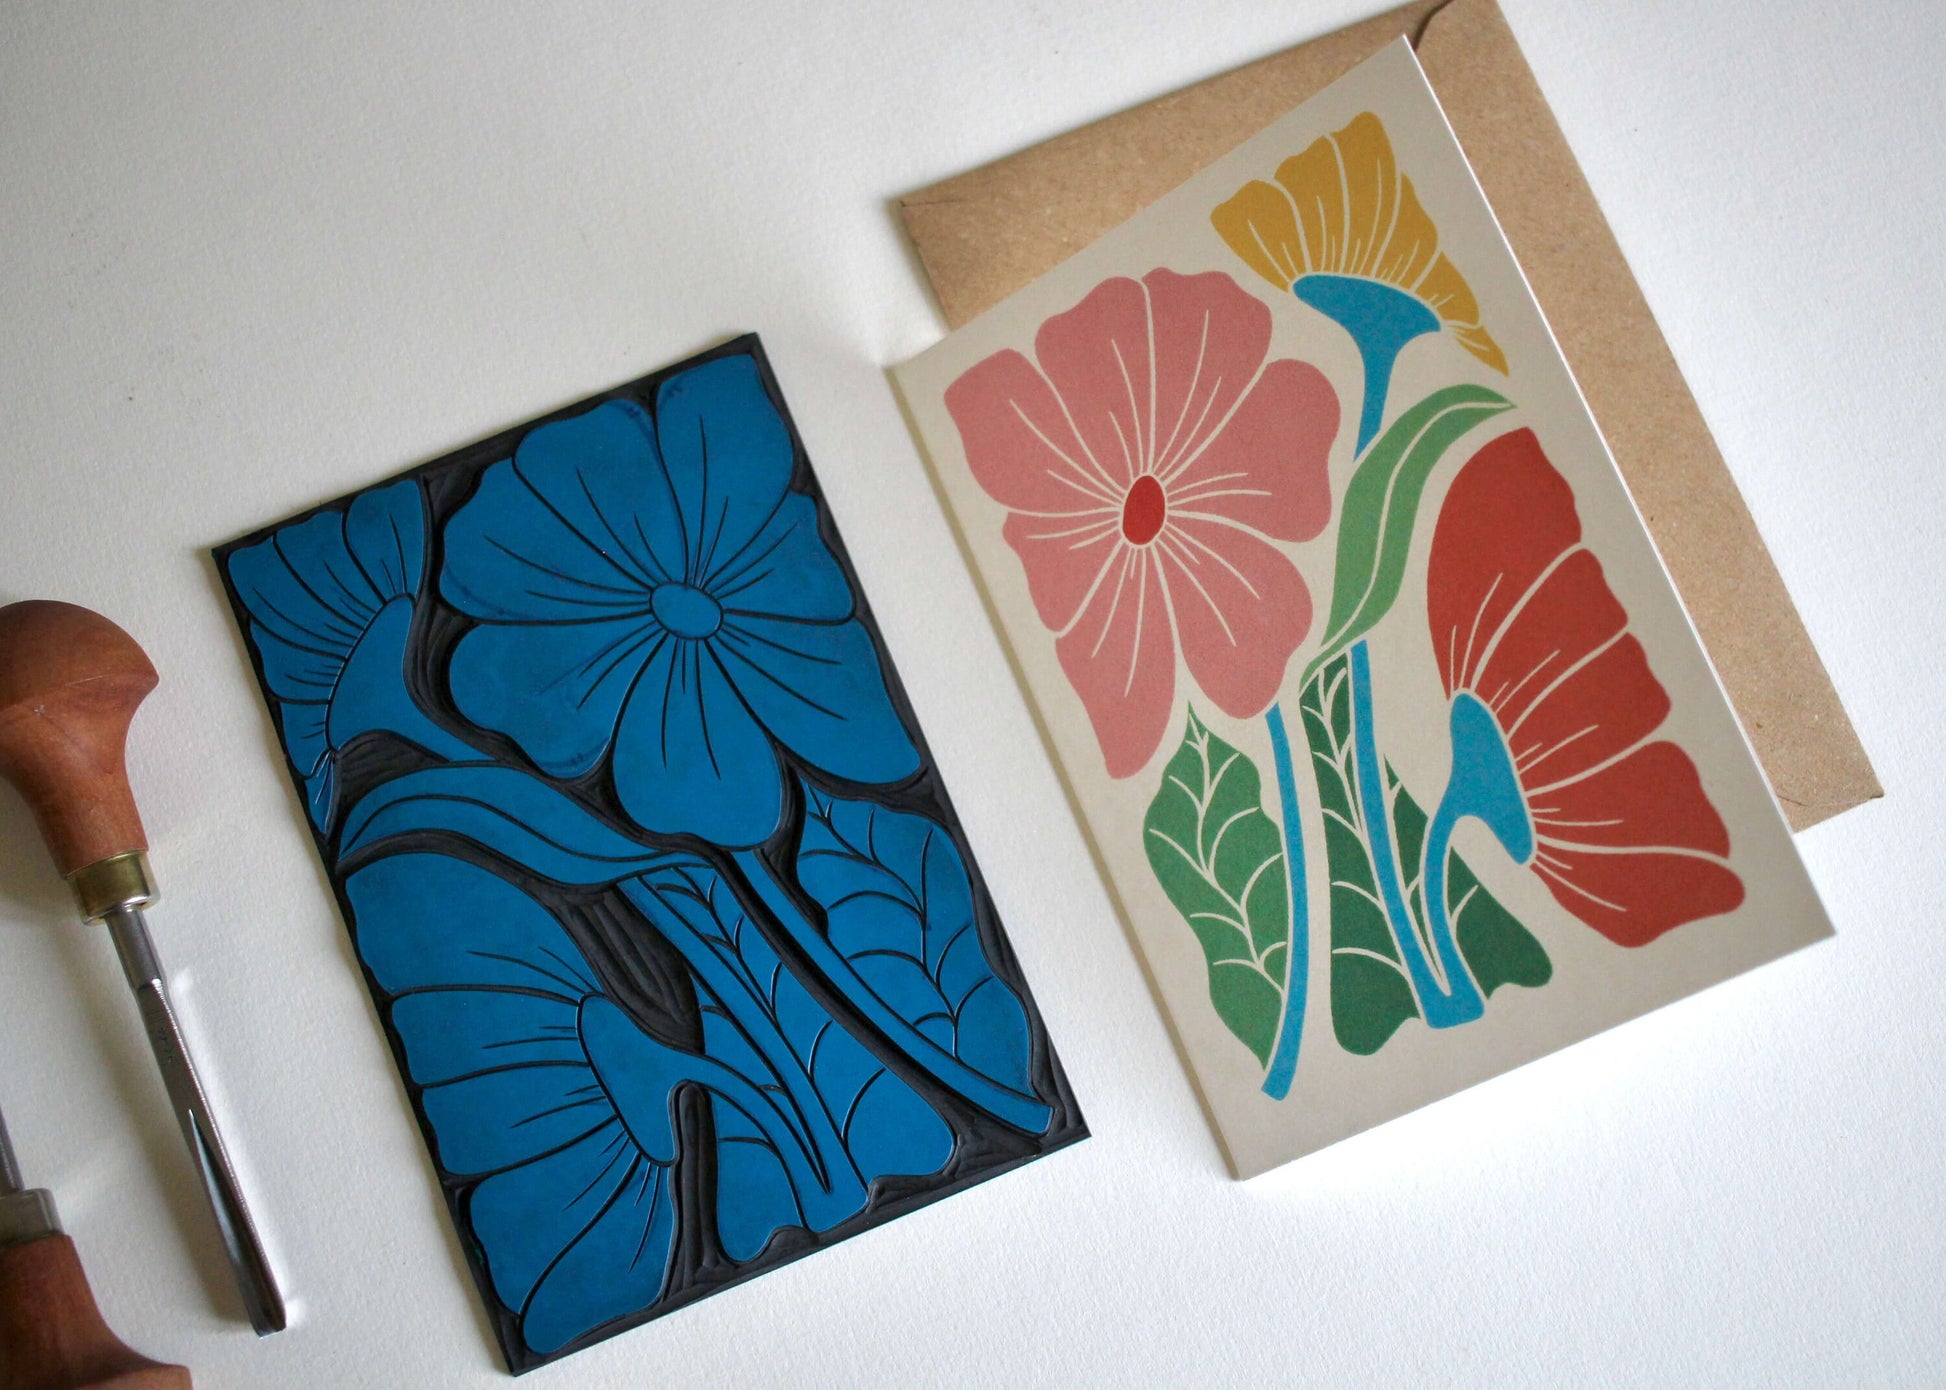 Linocut Bright & Beautiful Floral Greeting Card - Single Card and Envelope / Lino Print Flower Greeting Card / Happy, colourful flowers card